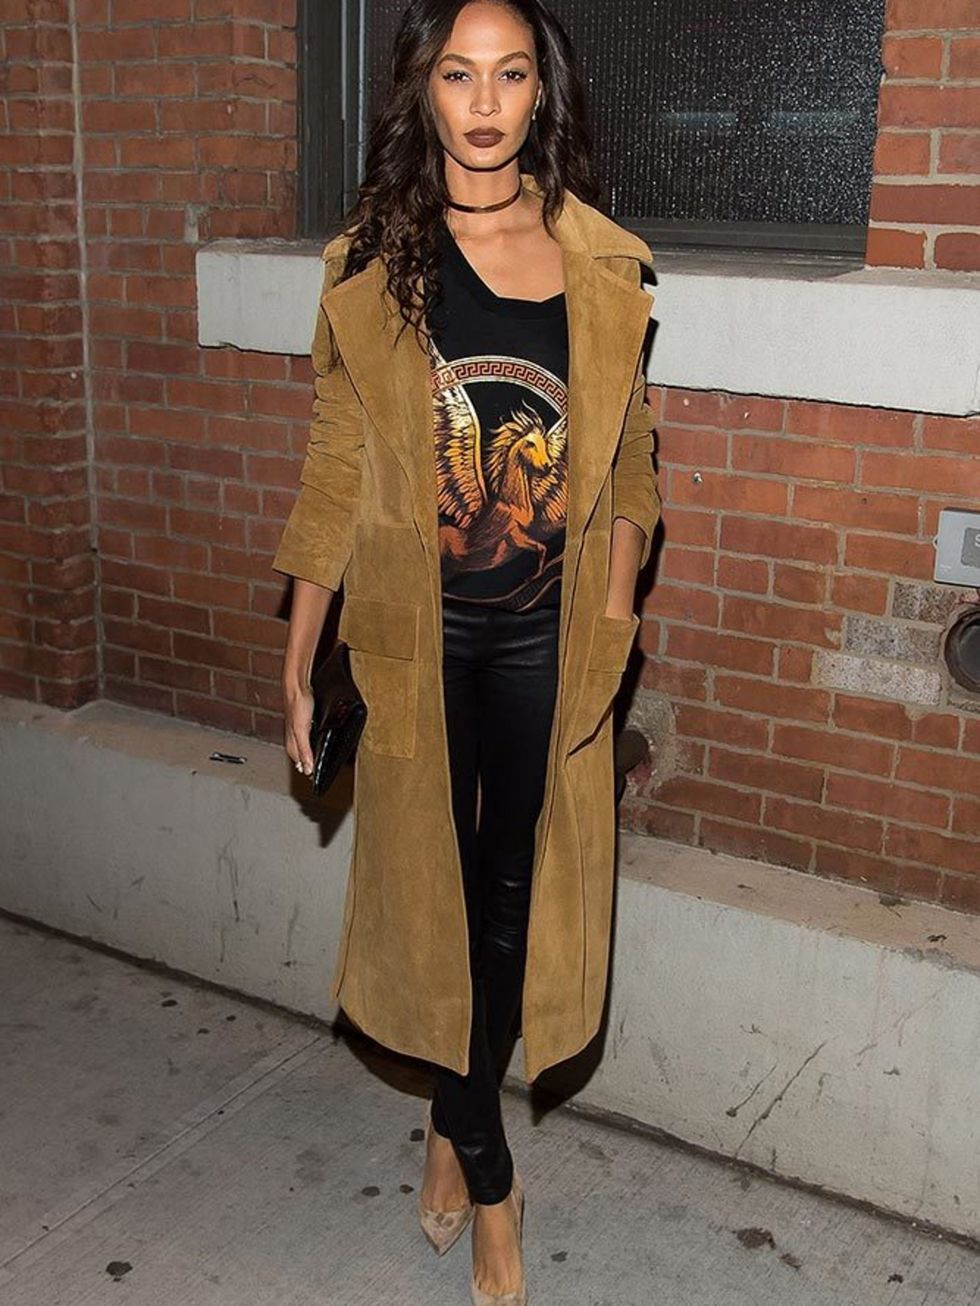 Joan Smalls attends the Victoria's Secret viewing party in New York, December 2015